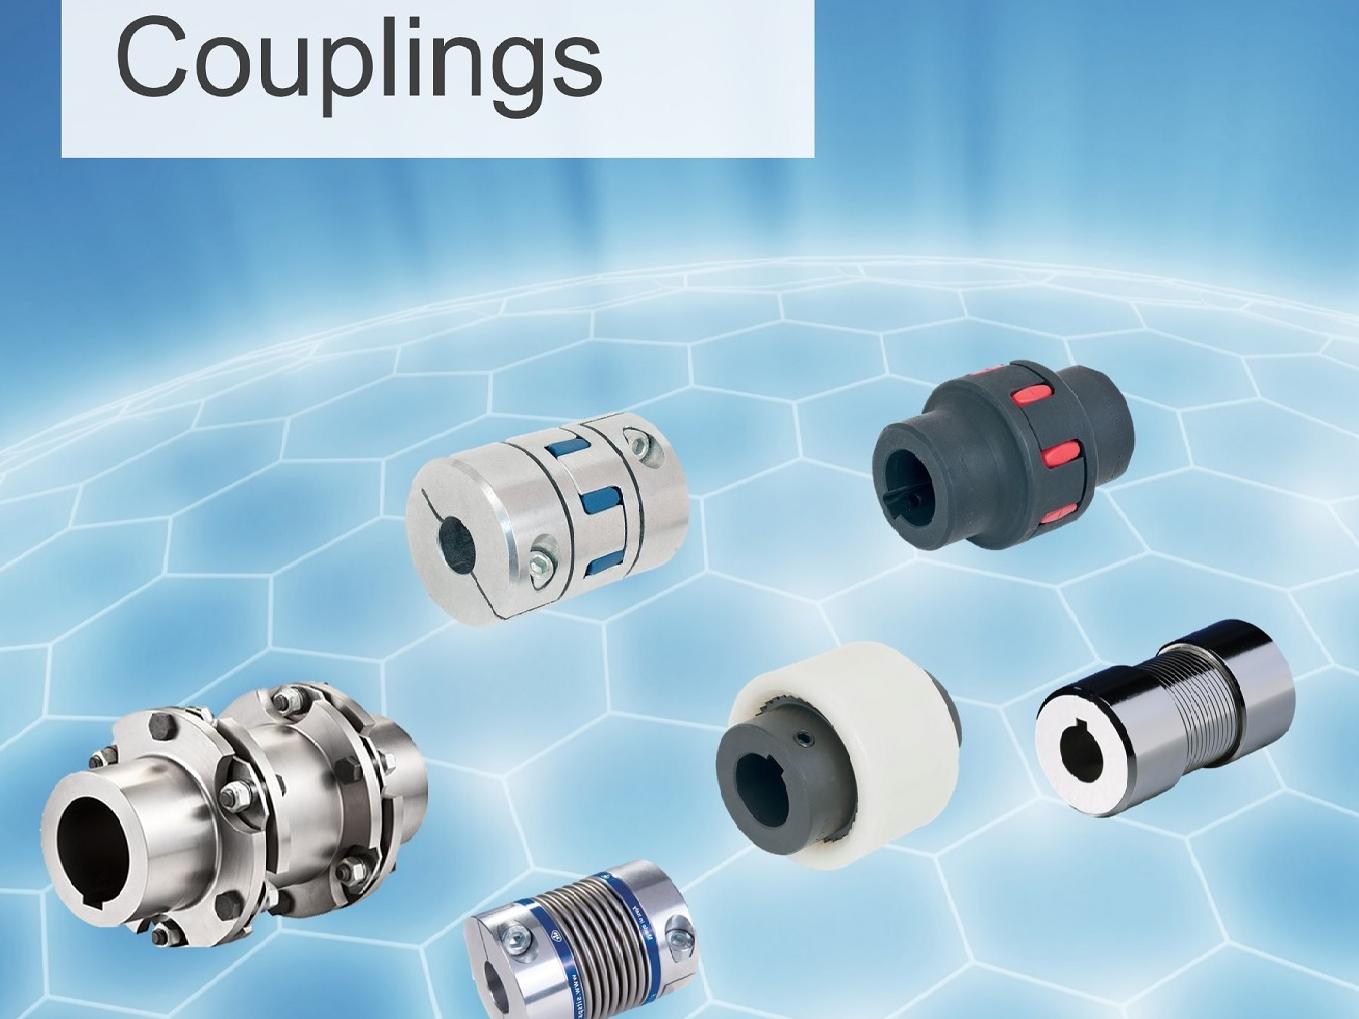 The wide-ranging world of shaft couplings